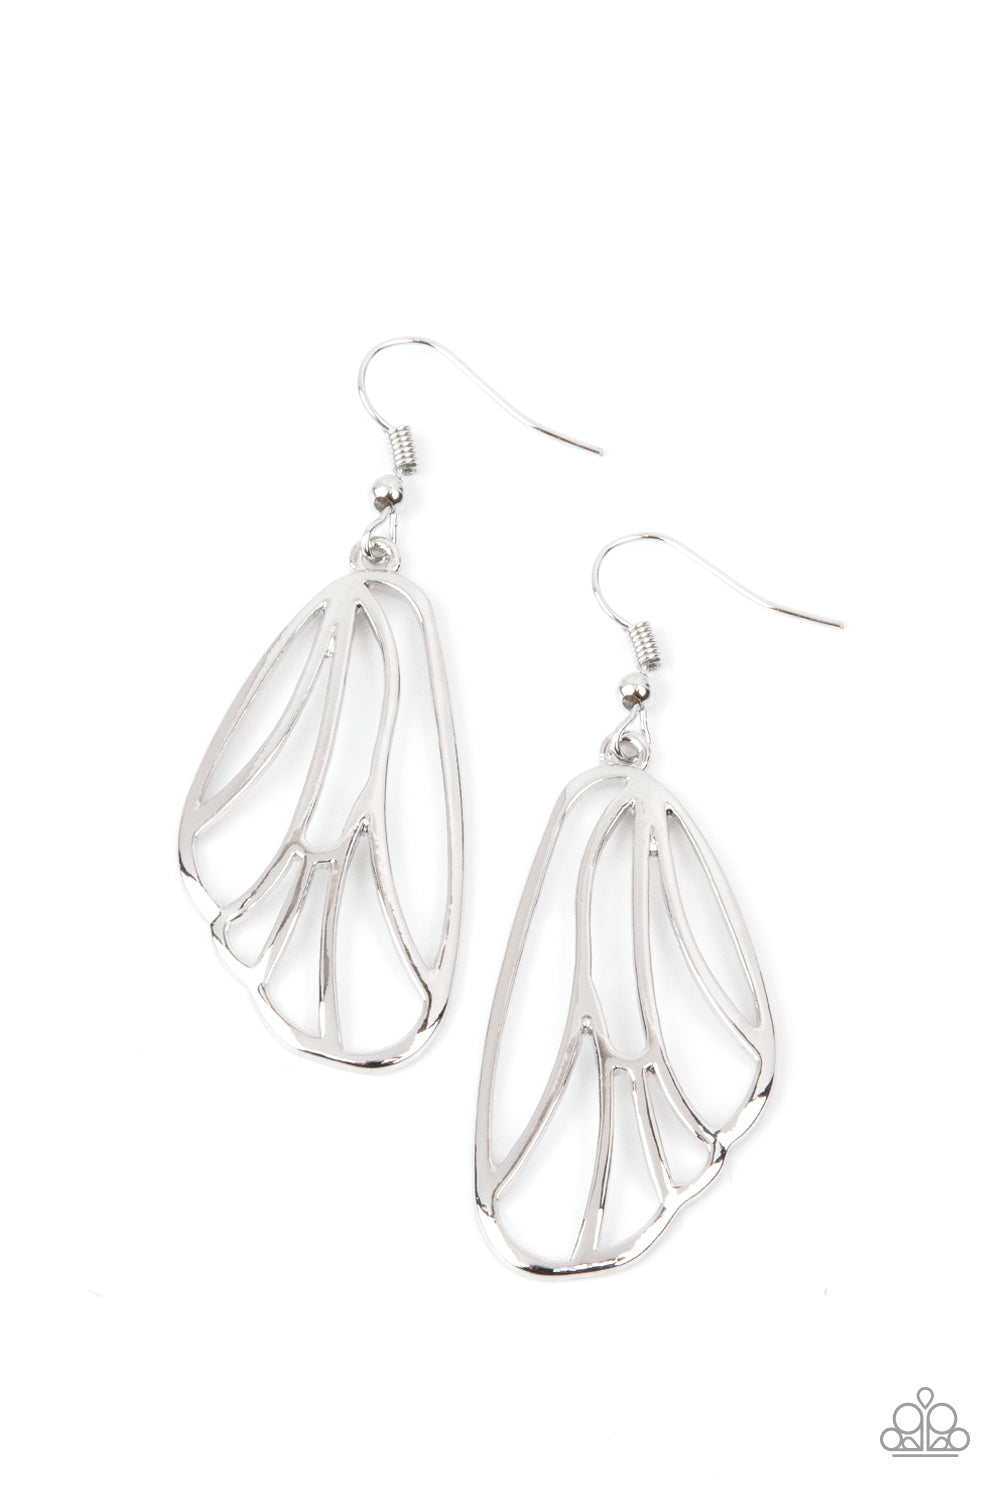 Turn Into A Butterfly - Silver Earrings - Princess Glam Shop